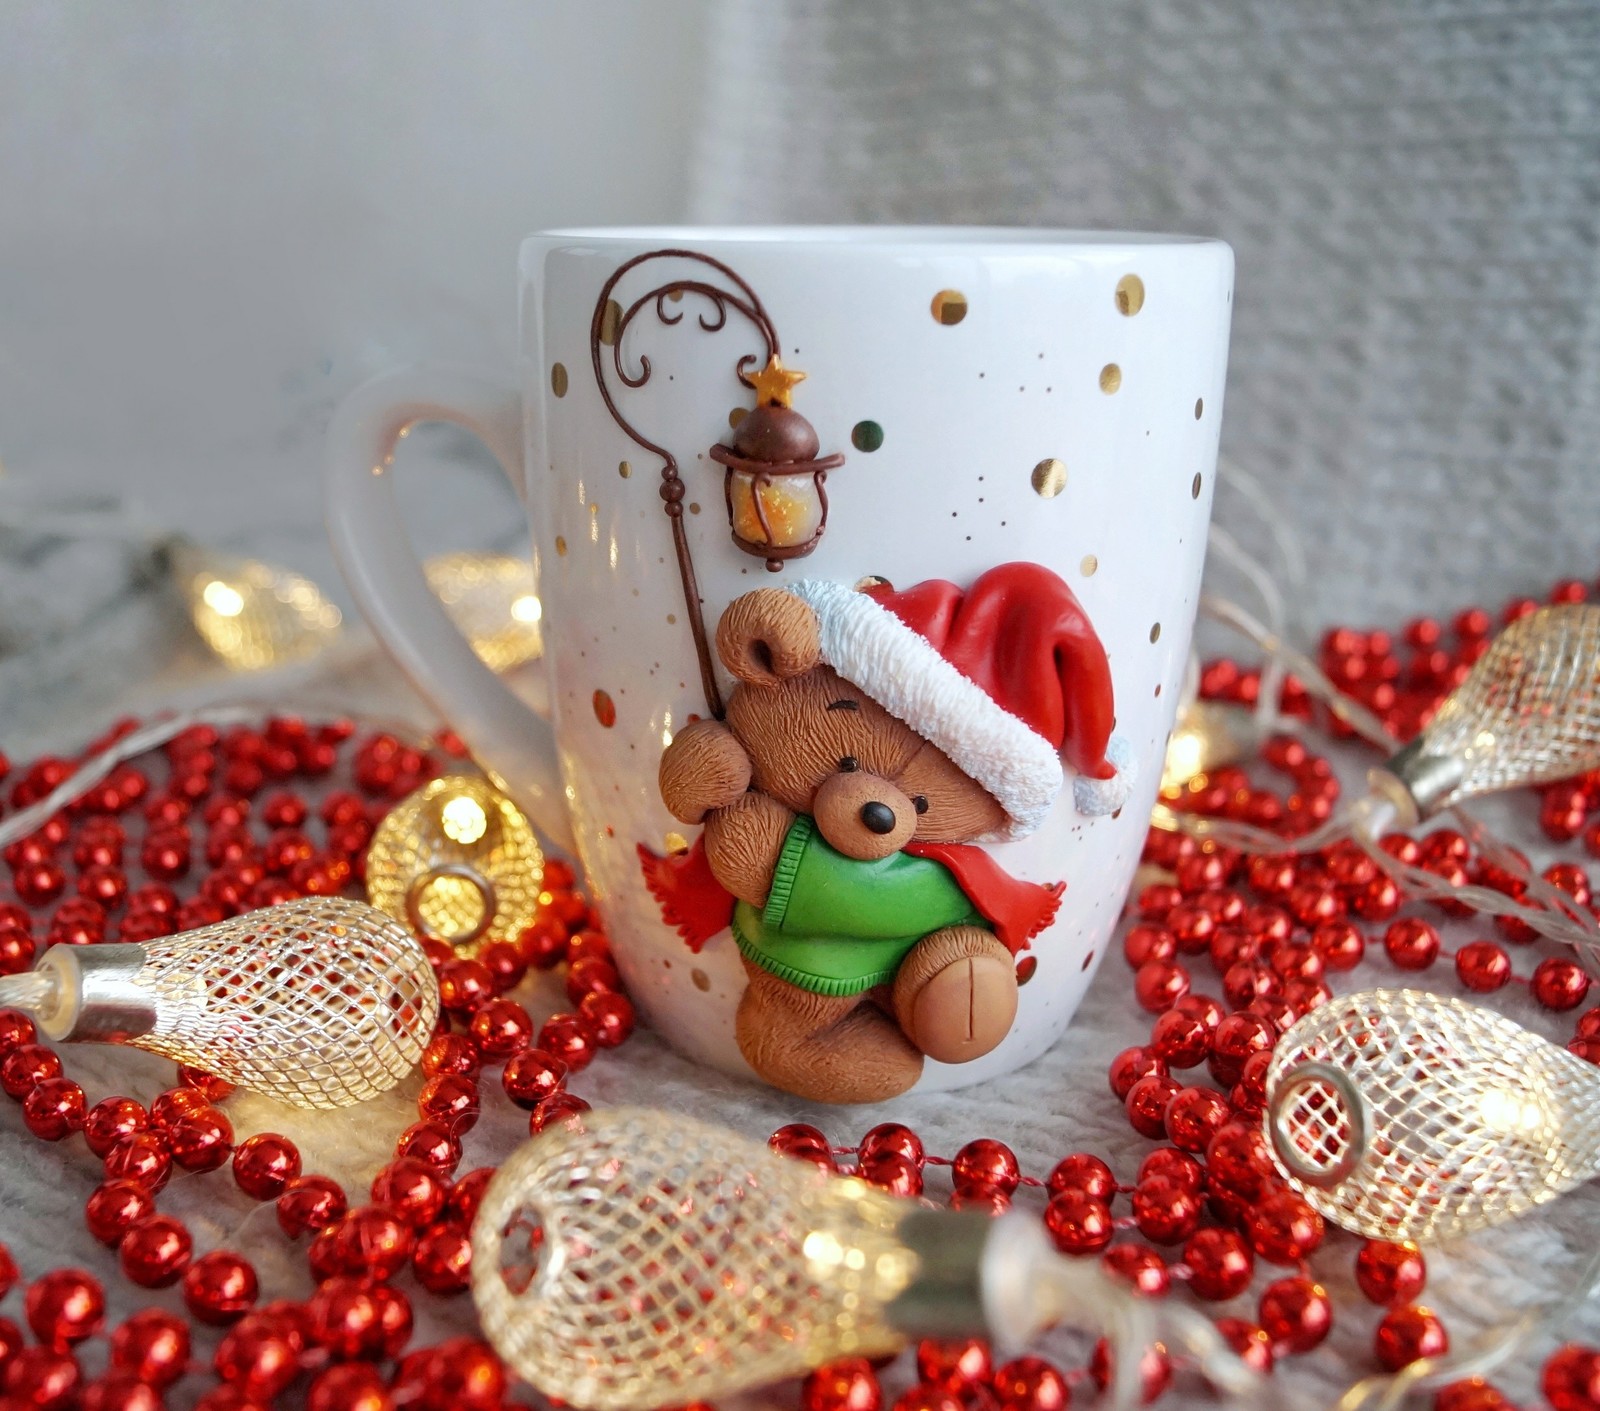 New Year's mug - My, Polymer clay, Milota, The Bears, New Year, With your own hands, Needlework without process